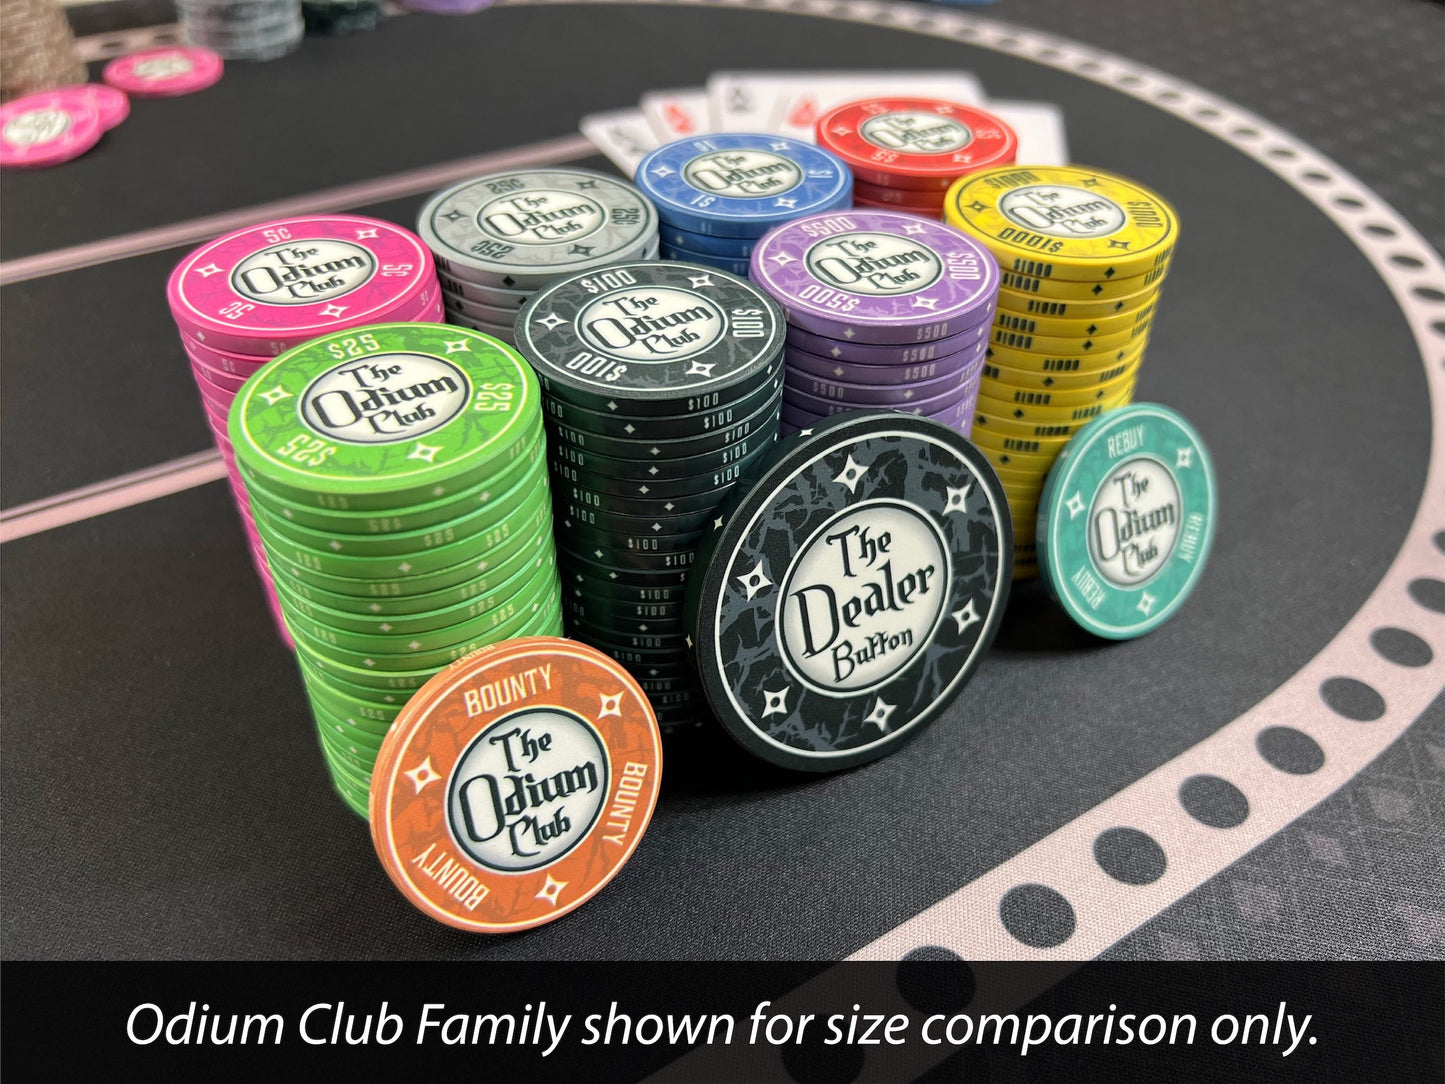 Shown here are all 8 denominations of Odium Club poker chip stacks, the 43mm Odium Club Rebuy chip, the 43mm Odium Club Bounty chip, and the 60mm (2.36 inch) Odium Club Dealer Button. The 39mm chips and the 43mm bounty and rebuy chips are 3.3mm thick--which is the standard poker chip thickness. The dealer button is .223-inch or 5.66mm thick. Available in 5¢ pink, 25¢ gray, $1 blue, $5 red, $25 green, $100 black, $500 purple, and $1000 yellow. Few offer matching poker chips and dealer buttons.